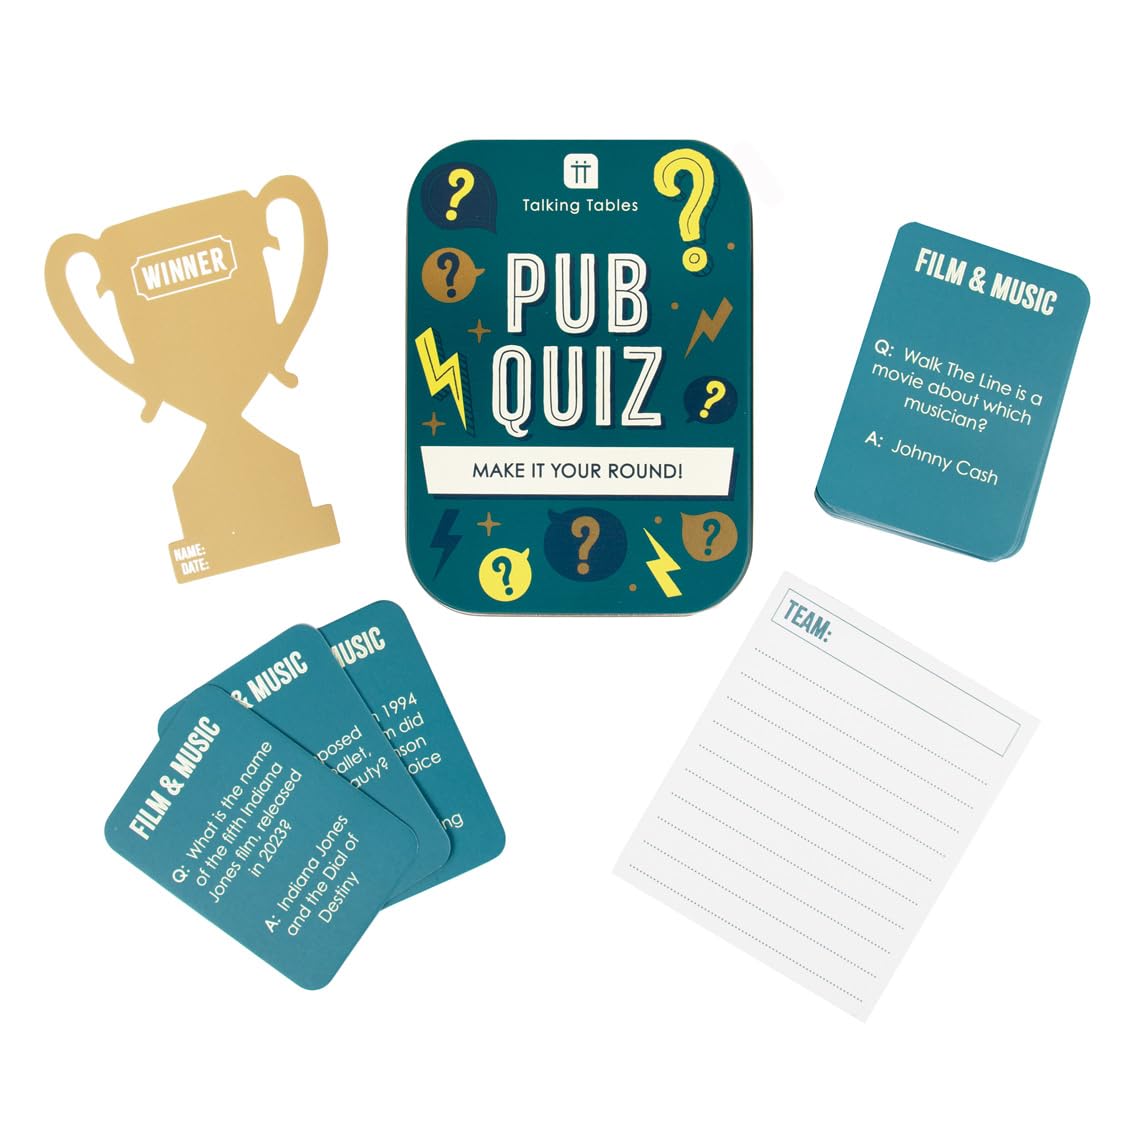 Talking Tables Pub Quiz Travel Game, Pocket Size General Knowledge Trivia for The Family to Play on a Journey or at Home Packed in a Giftable Tin Case, Secret Santa or Stocking Filler